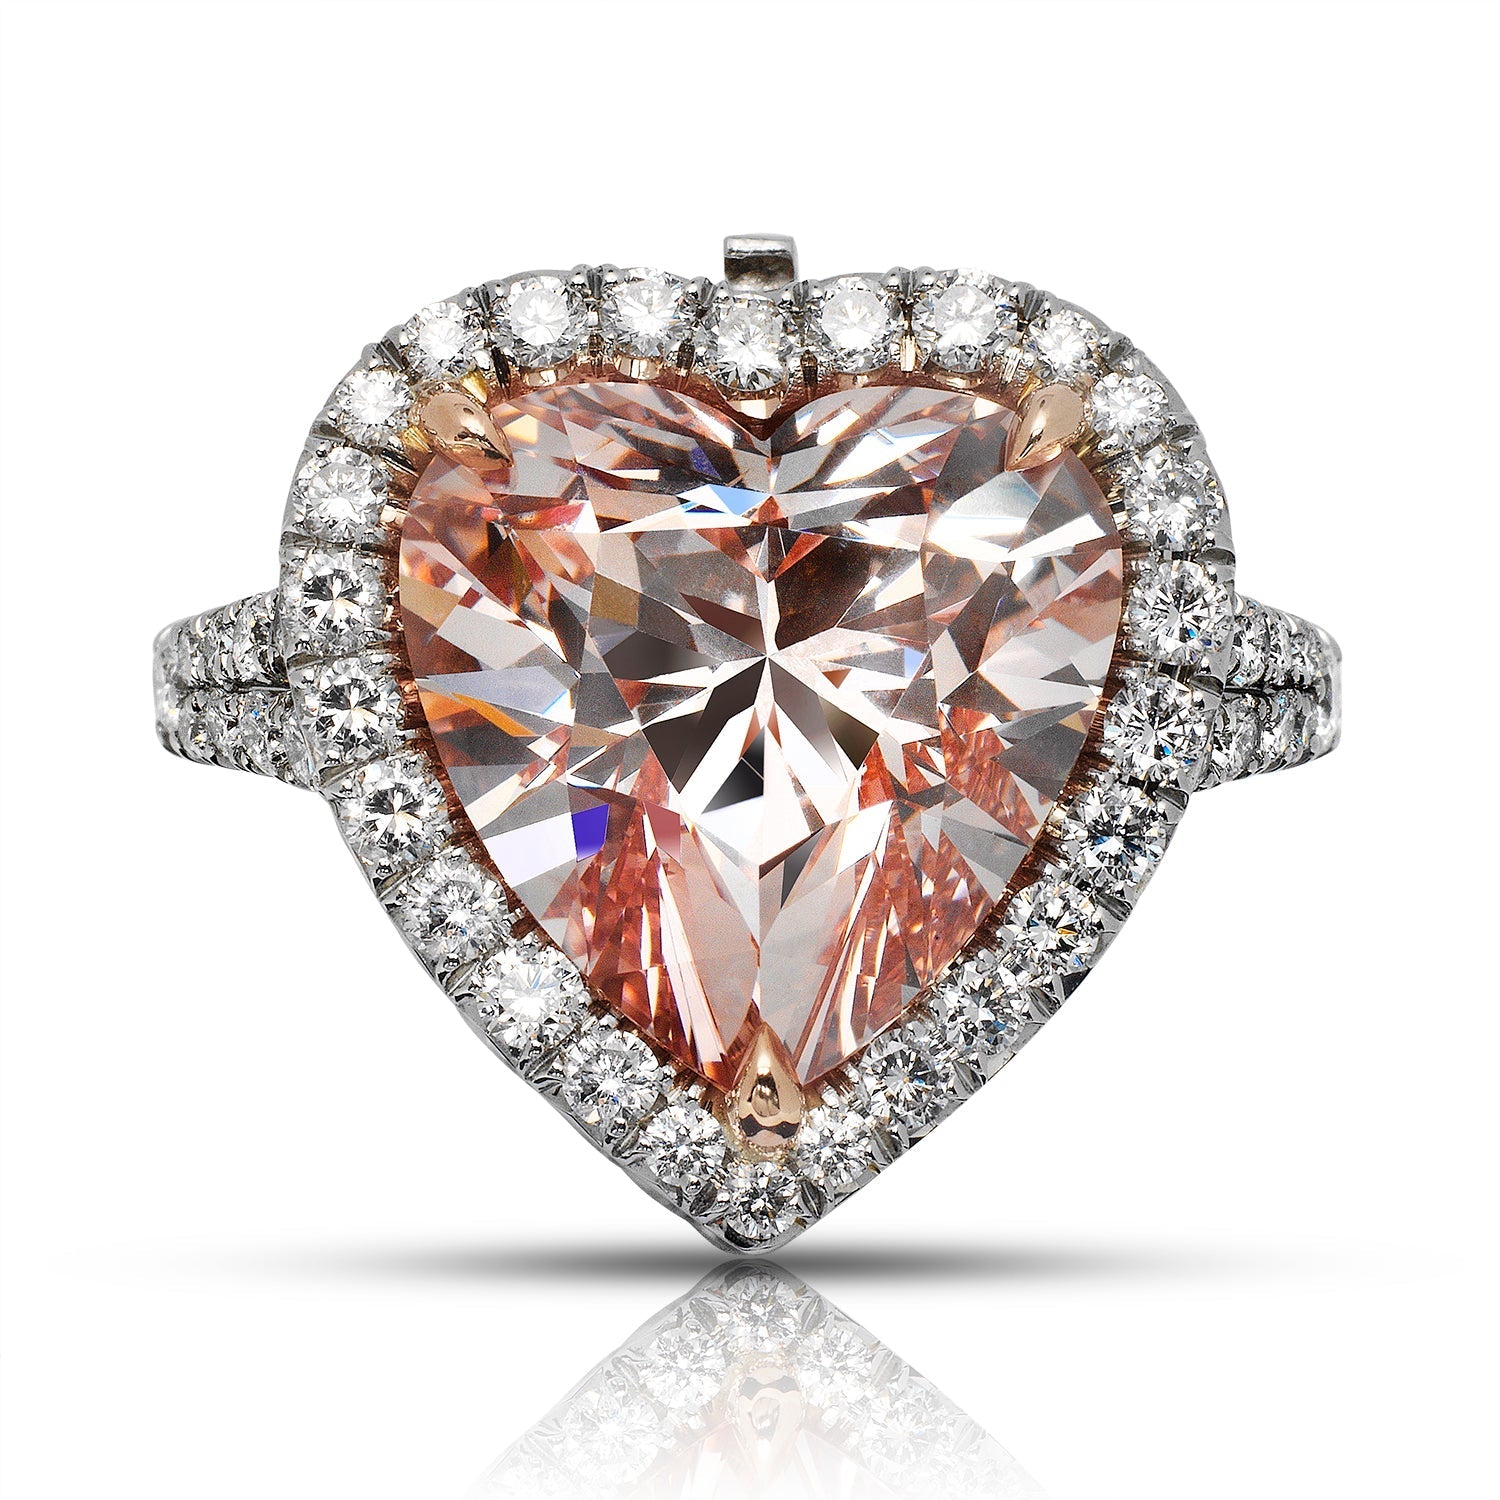 Heart Shaped Engagement Rings - For Confident and Show-stoppers